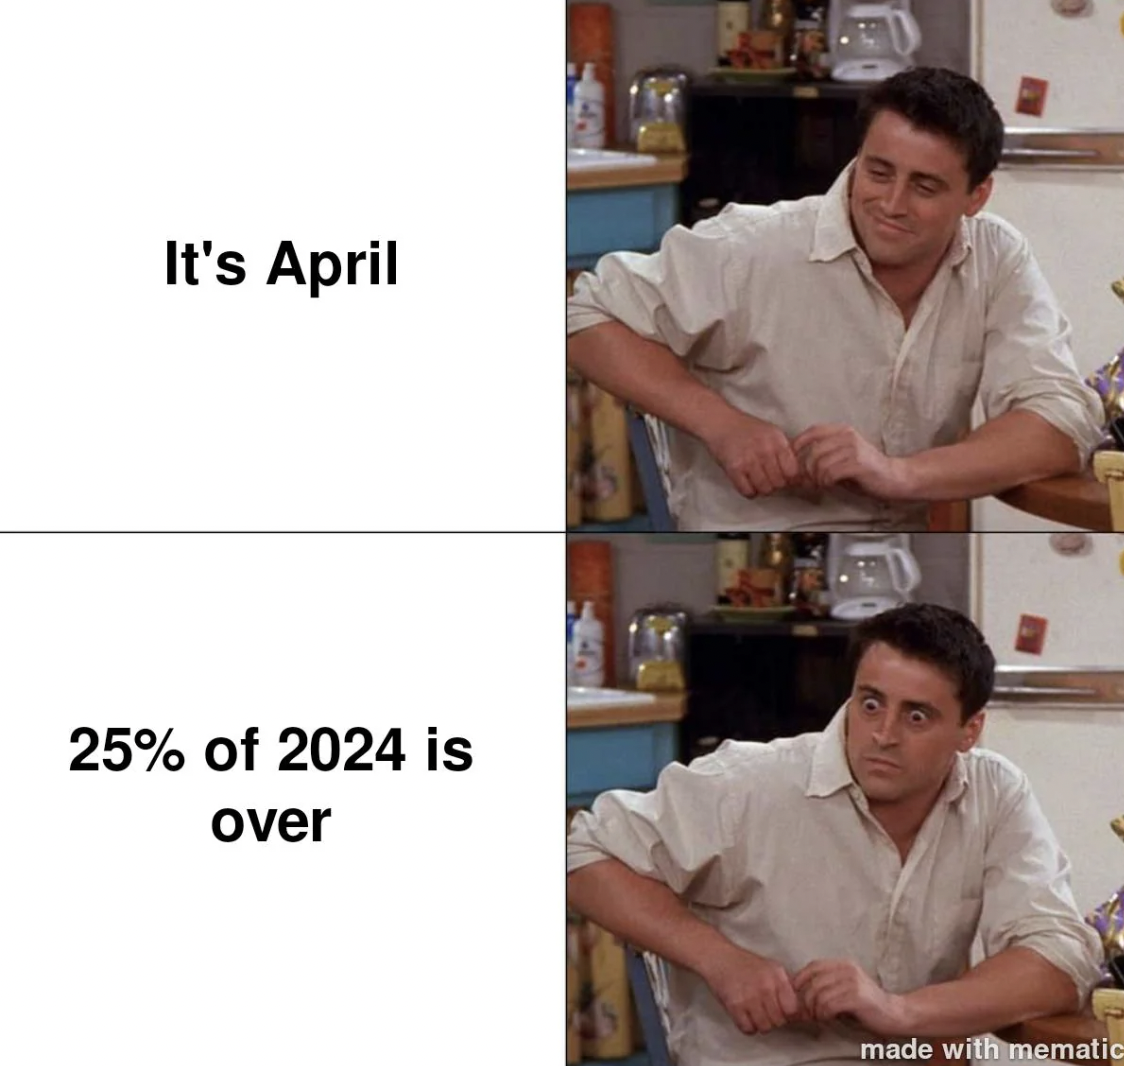 chef - It's April 25% of 2024 is over made with mematic